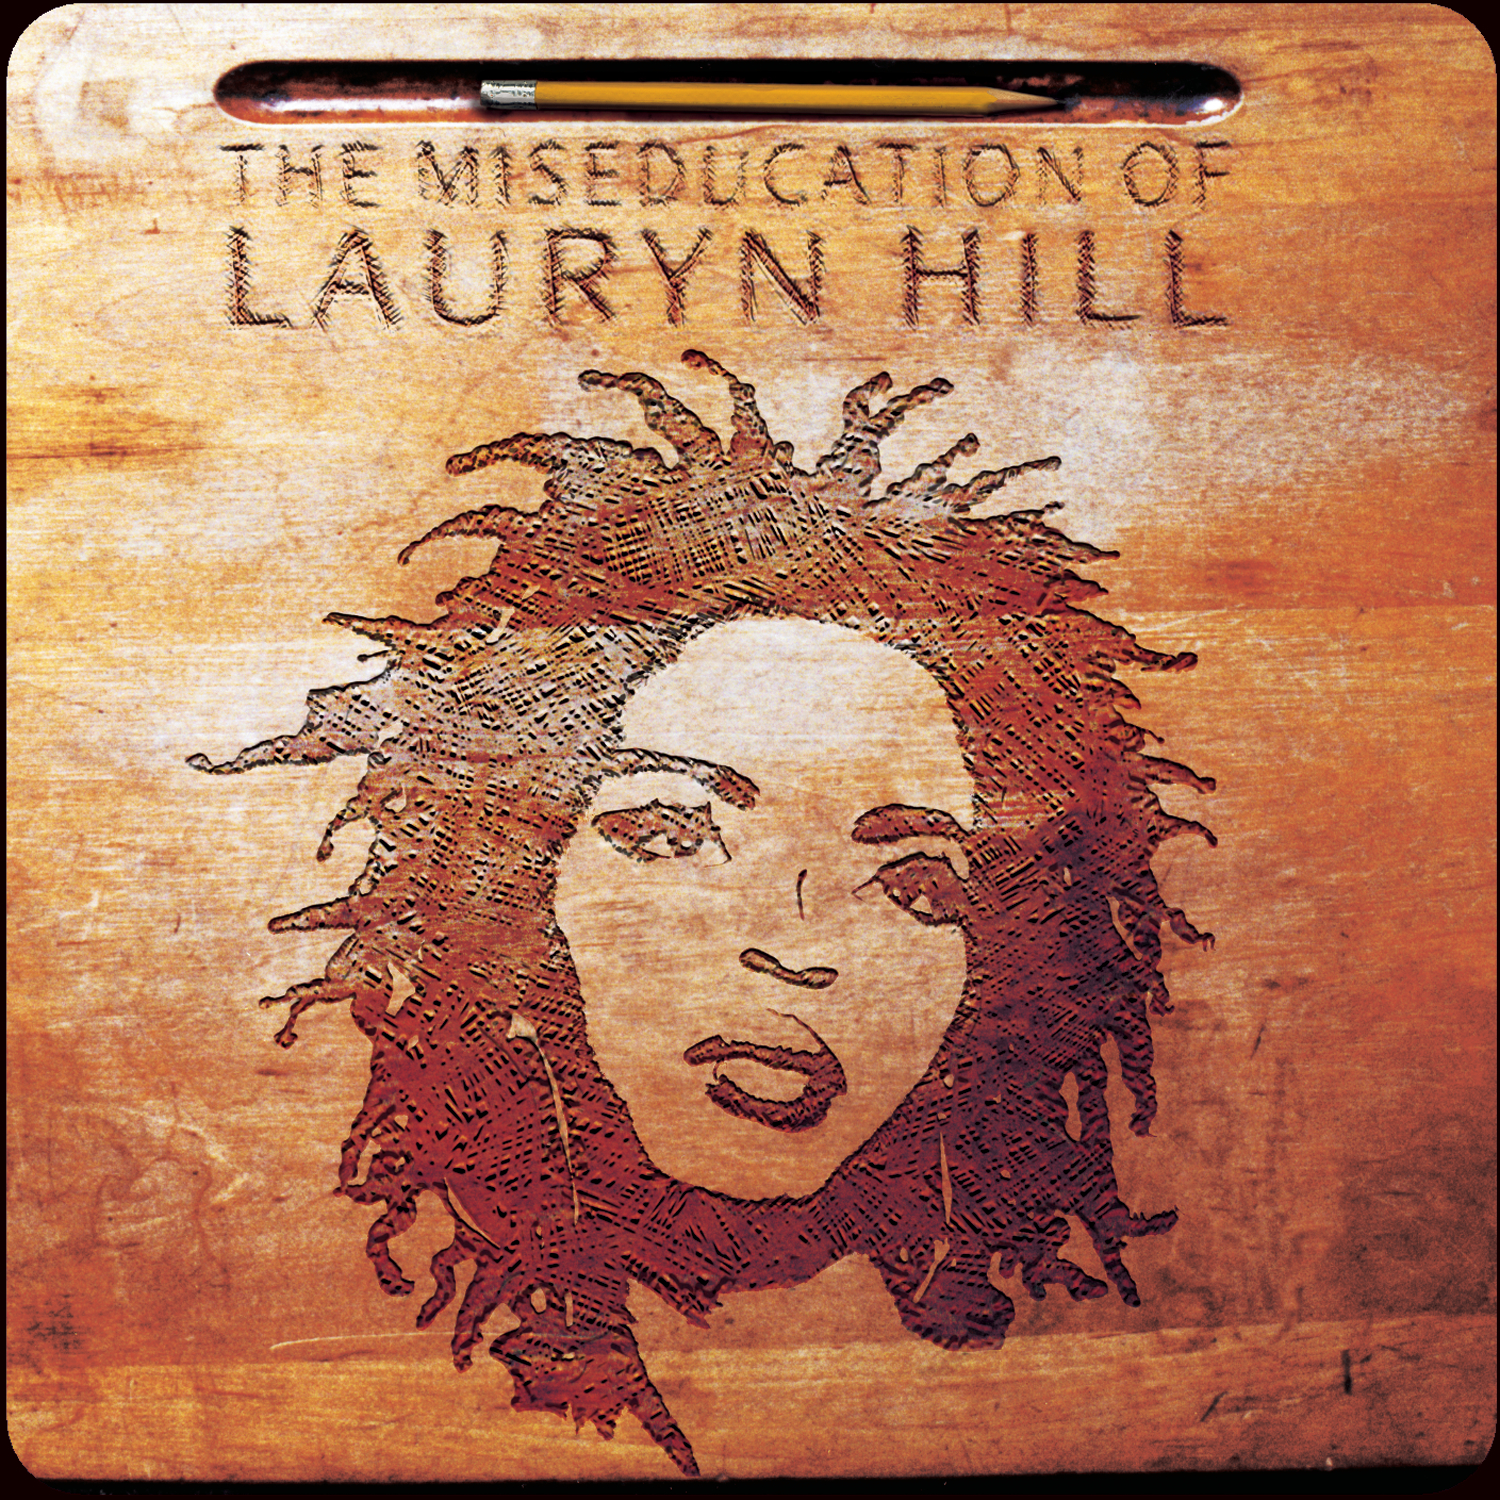 The Miseducation of Lauryn Hill album cover, repeated twice